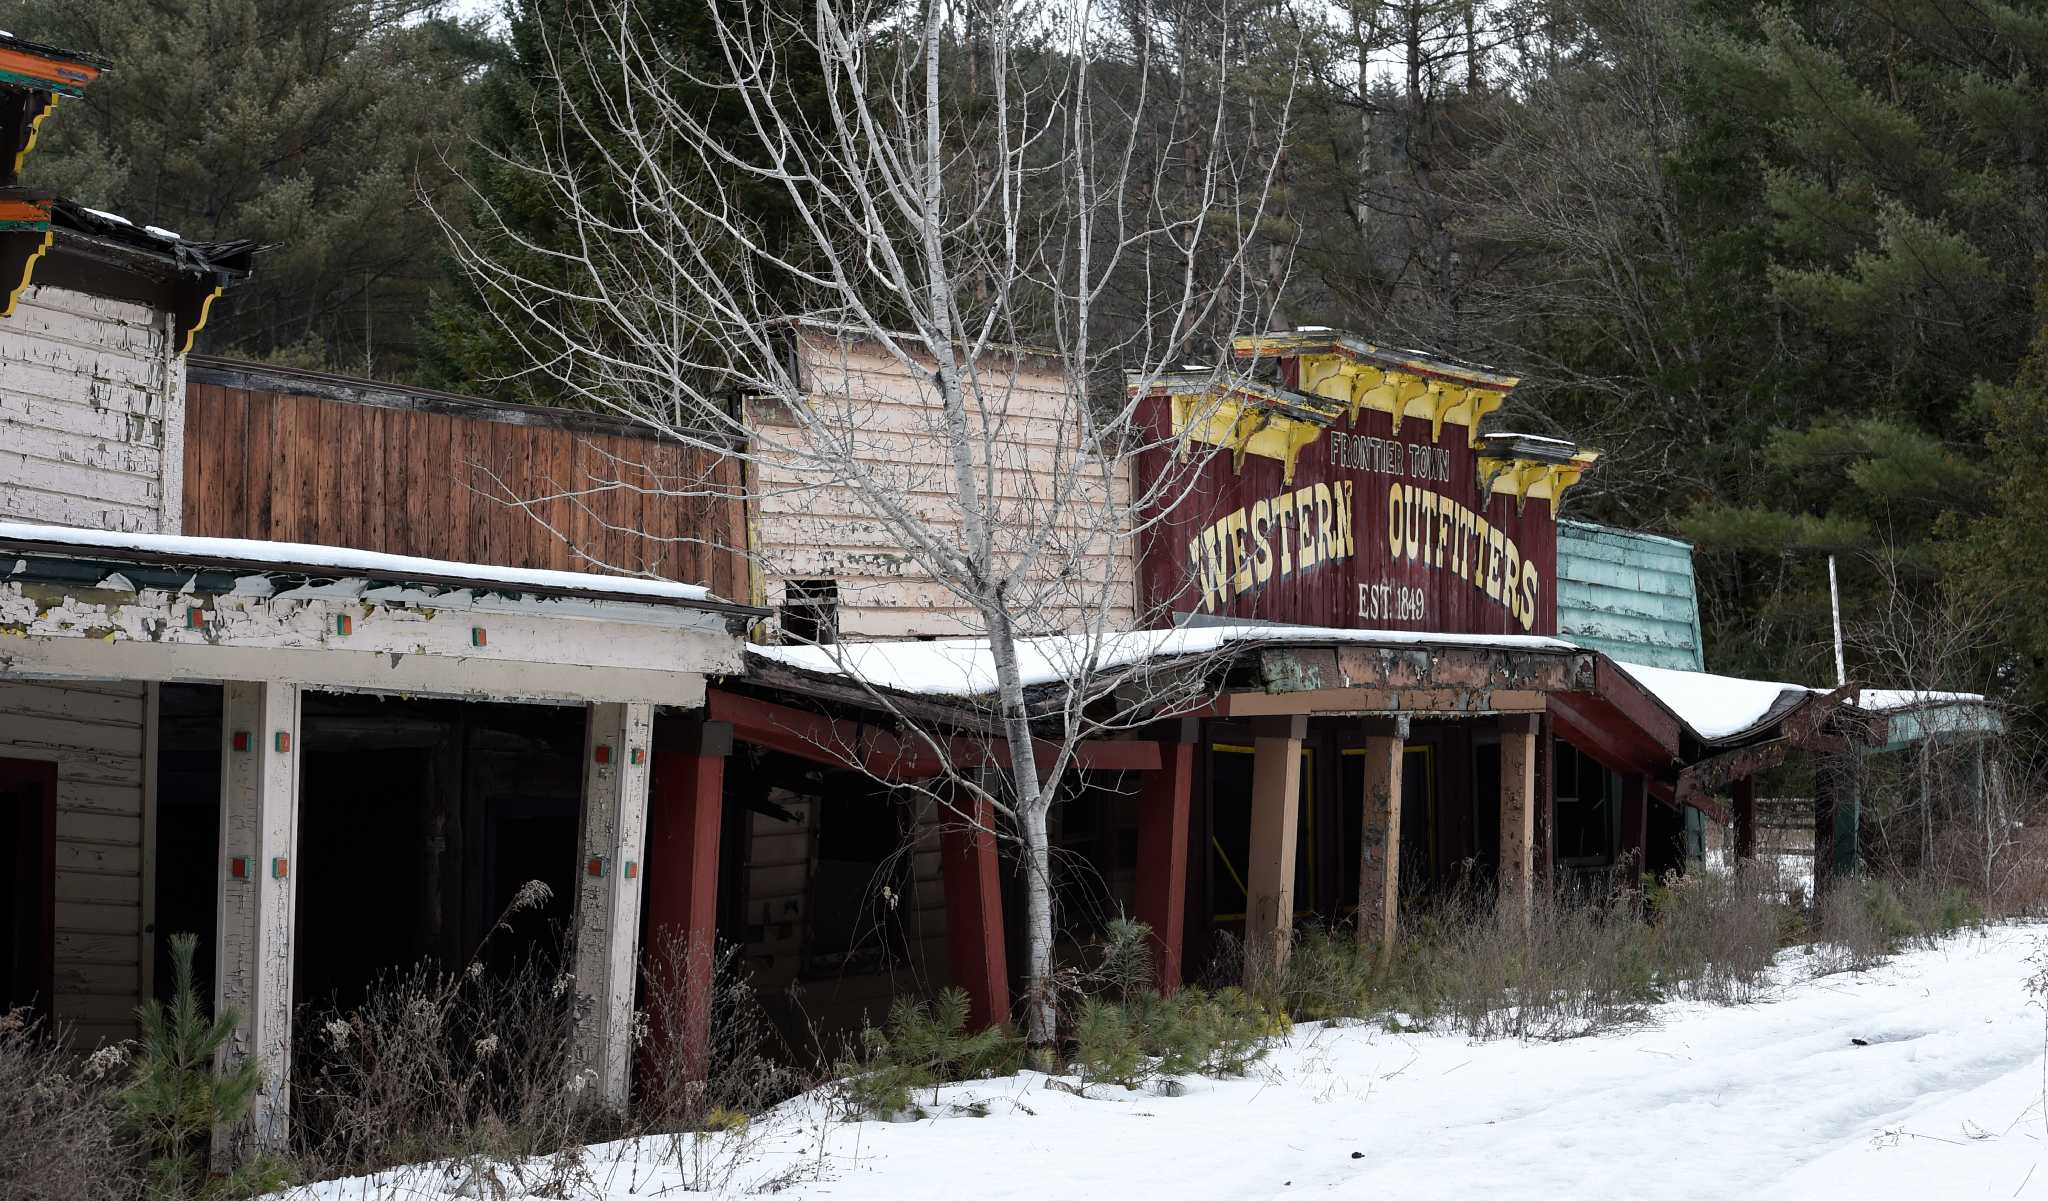 Frontier Town now resembles ghost town